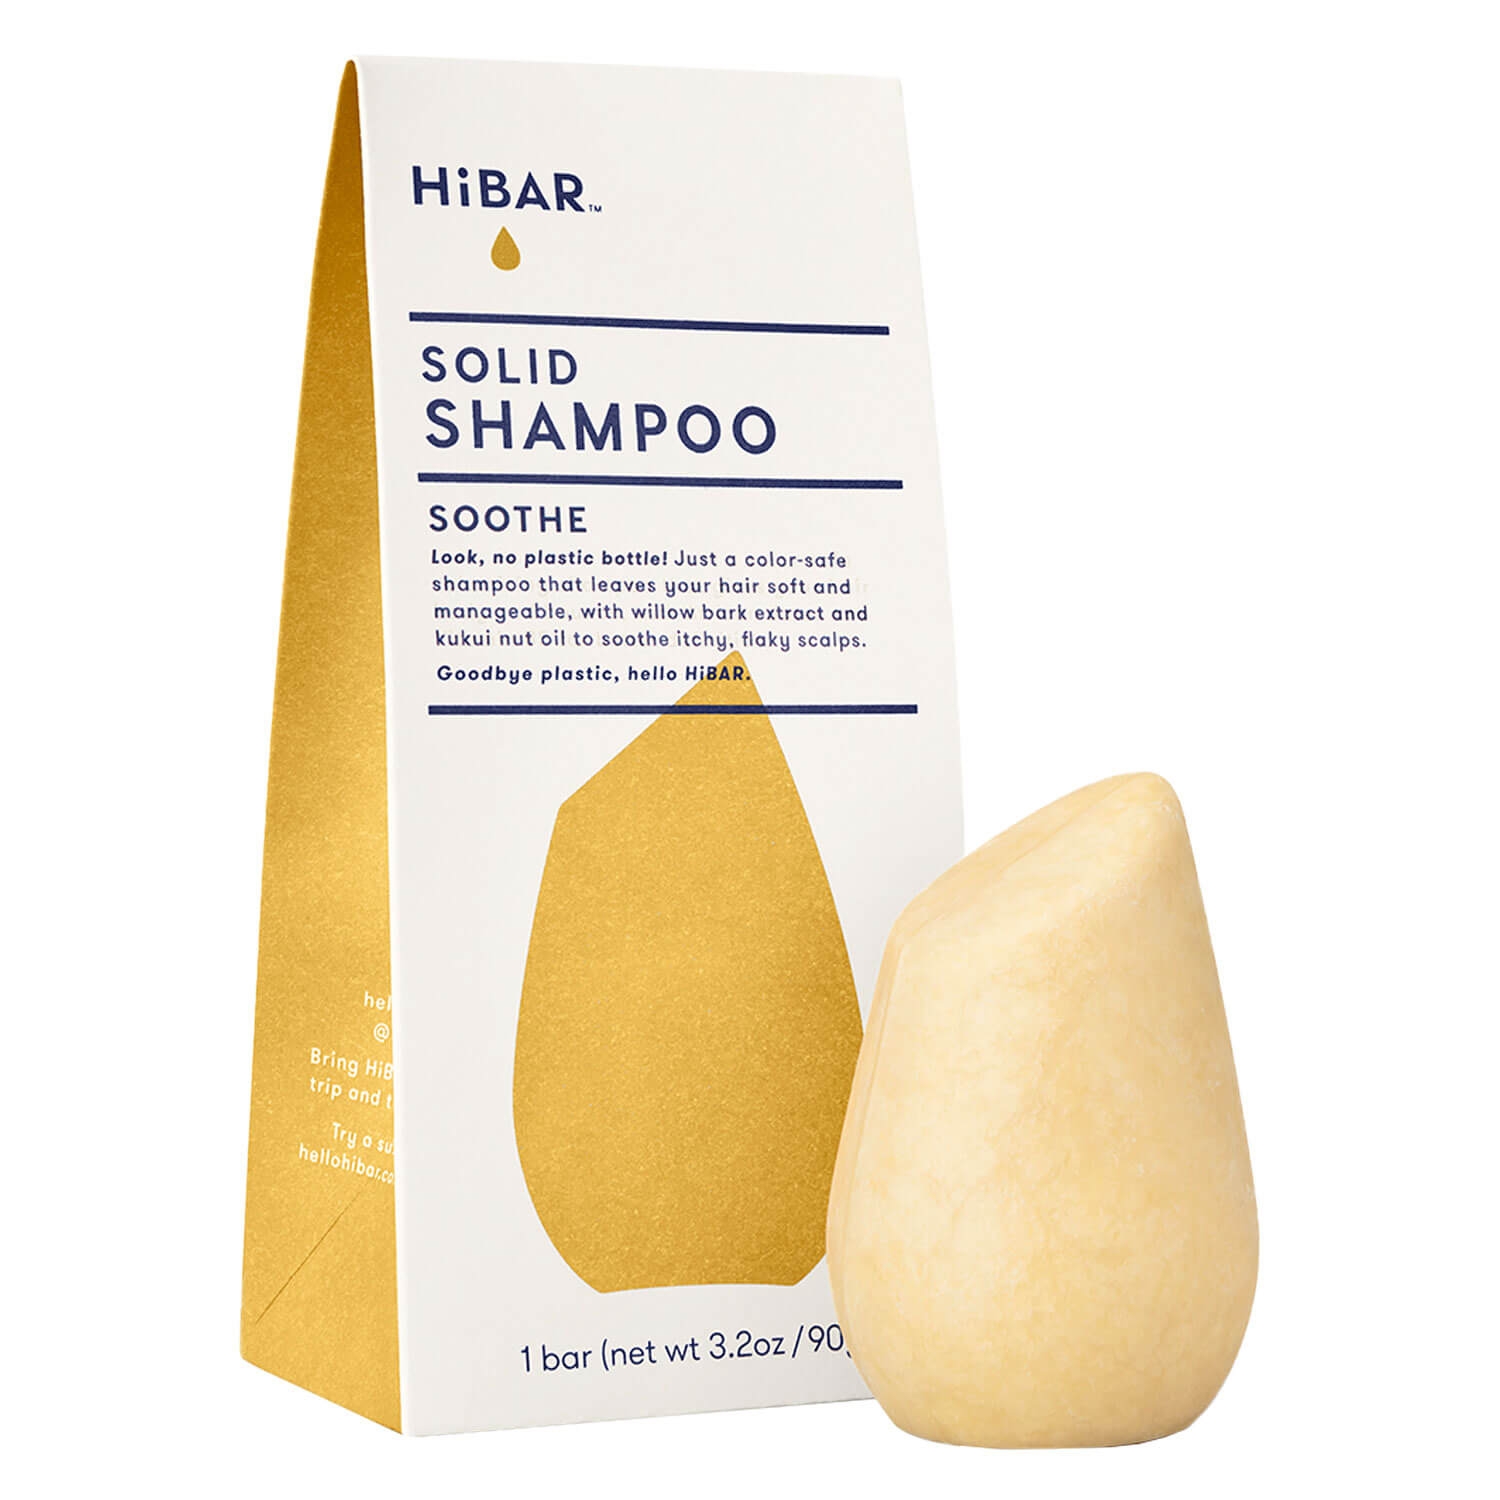 Product image from HiBAR - SOOTHE Festes Shampoo